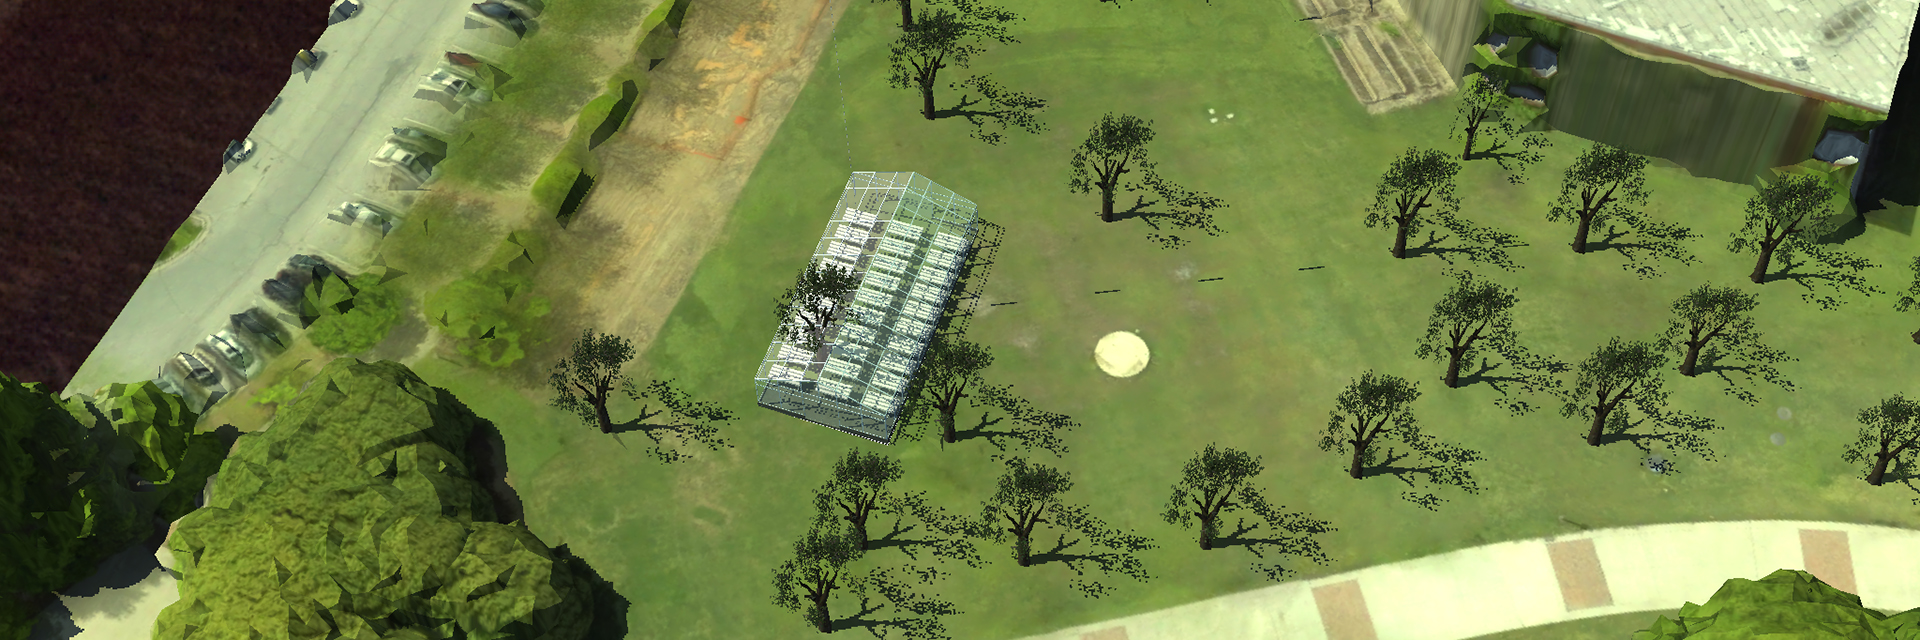 An illustration of an aerial view of a greenhouse on a grassy lawn.